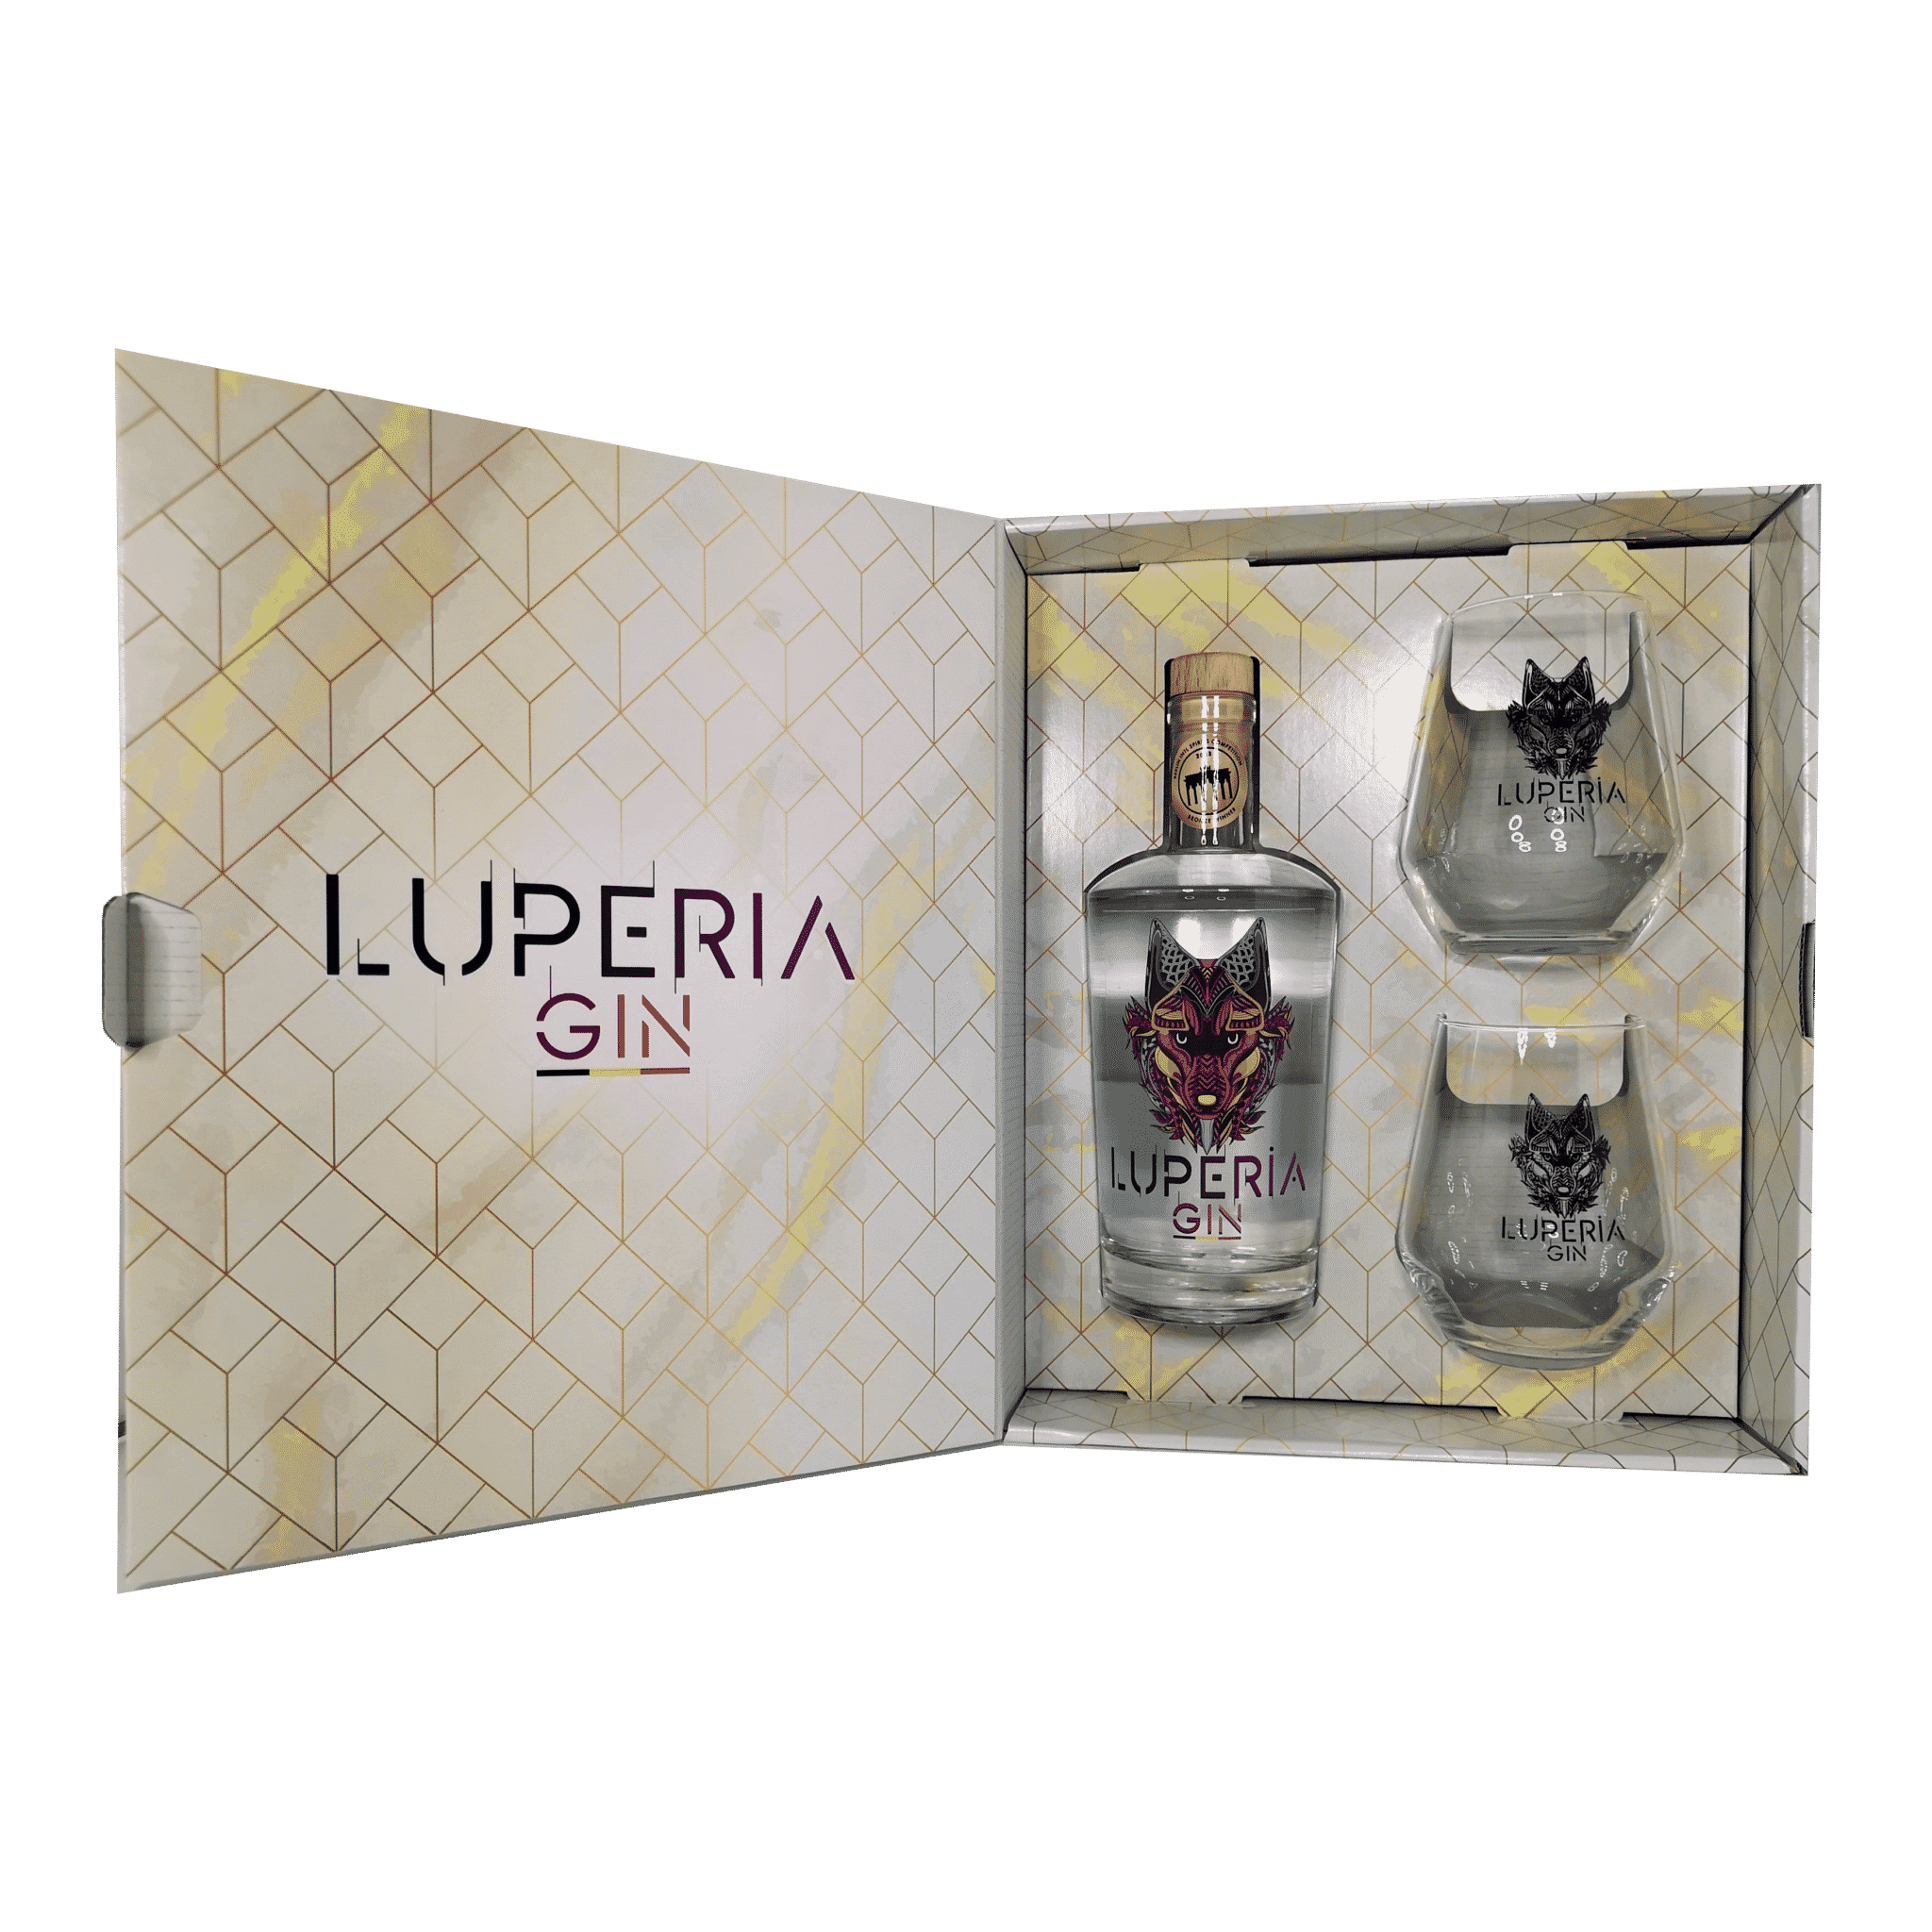 https://vinico.be/wp-content/uploads/2020/11/Pack-Luperia-Gin.png